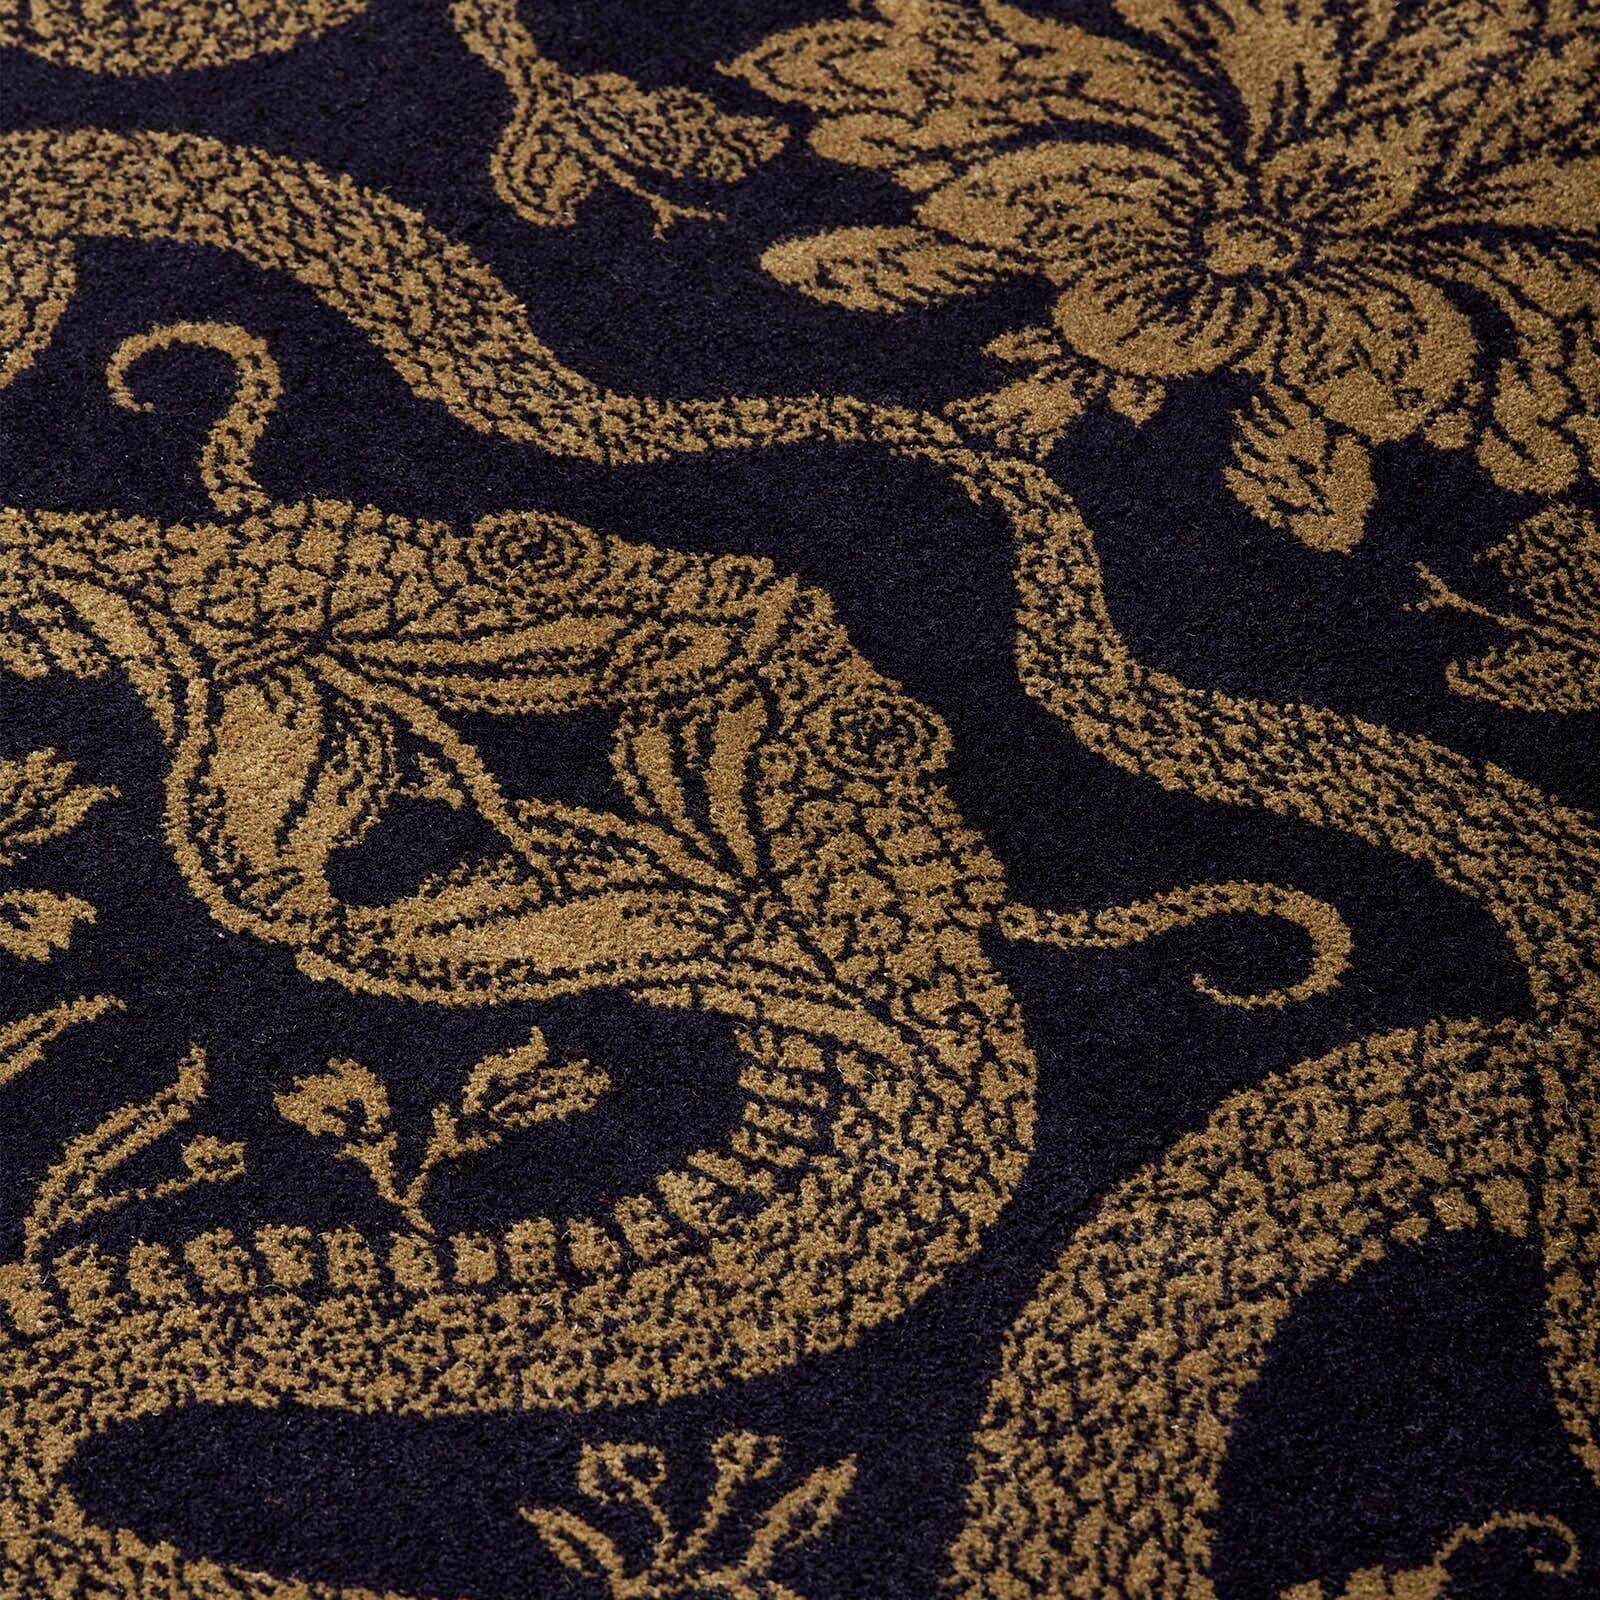 Fear not the snakes slithering across the floor of your home, for these are our House symbols of transformation and renewal. In an elegant palette of black and gold, the subversively beautiful ANACONDA rug is woven by Axminster Carpets, the historic